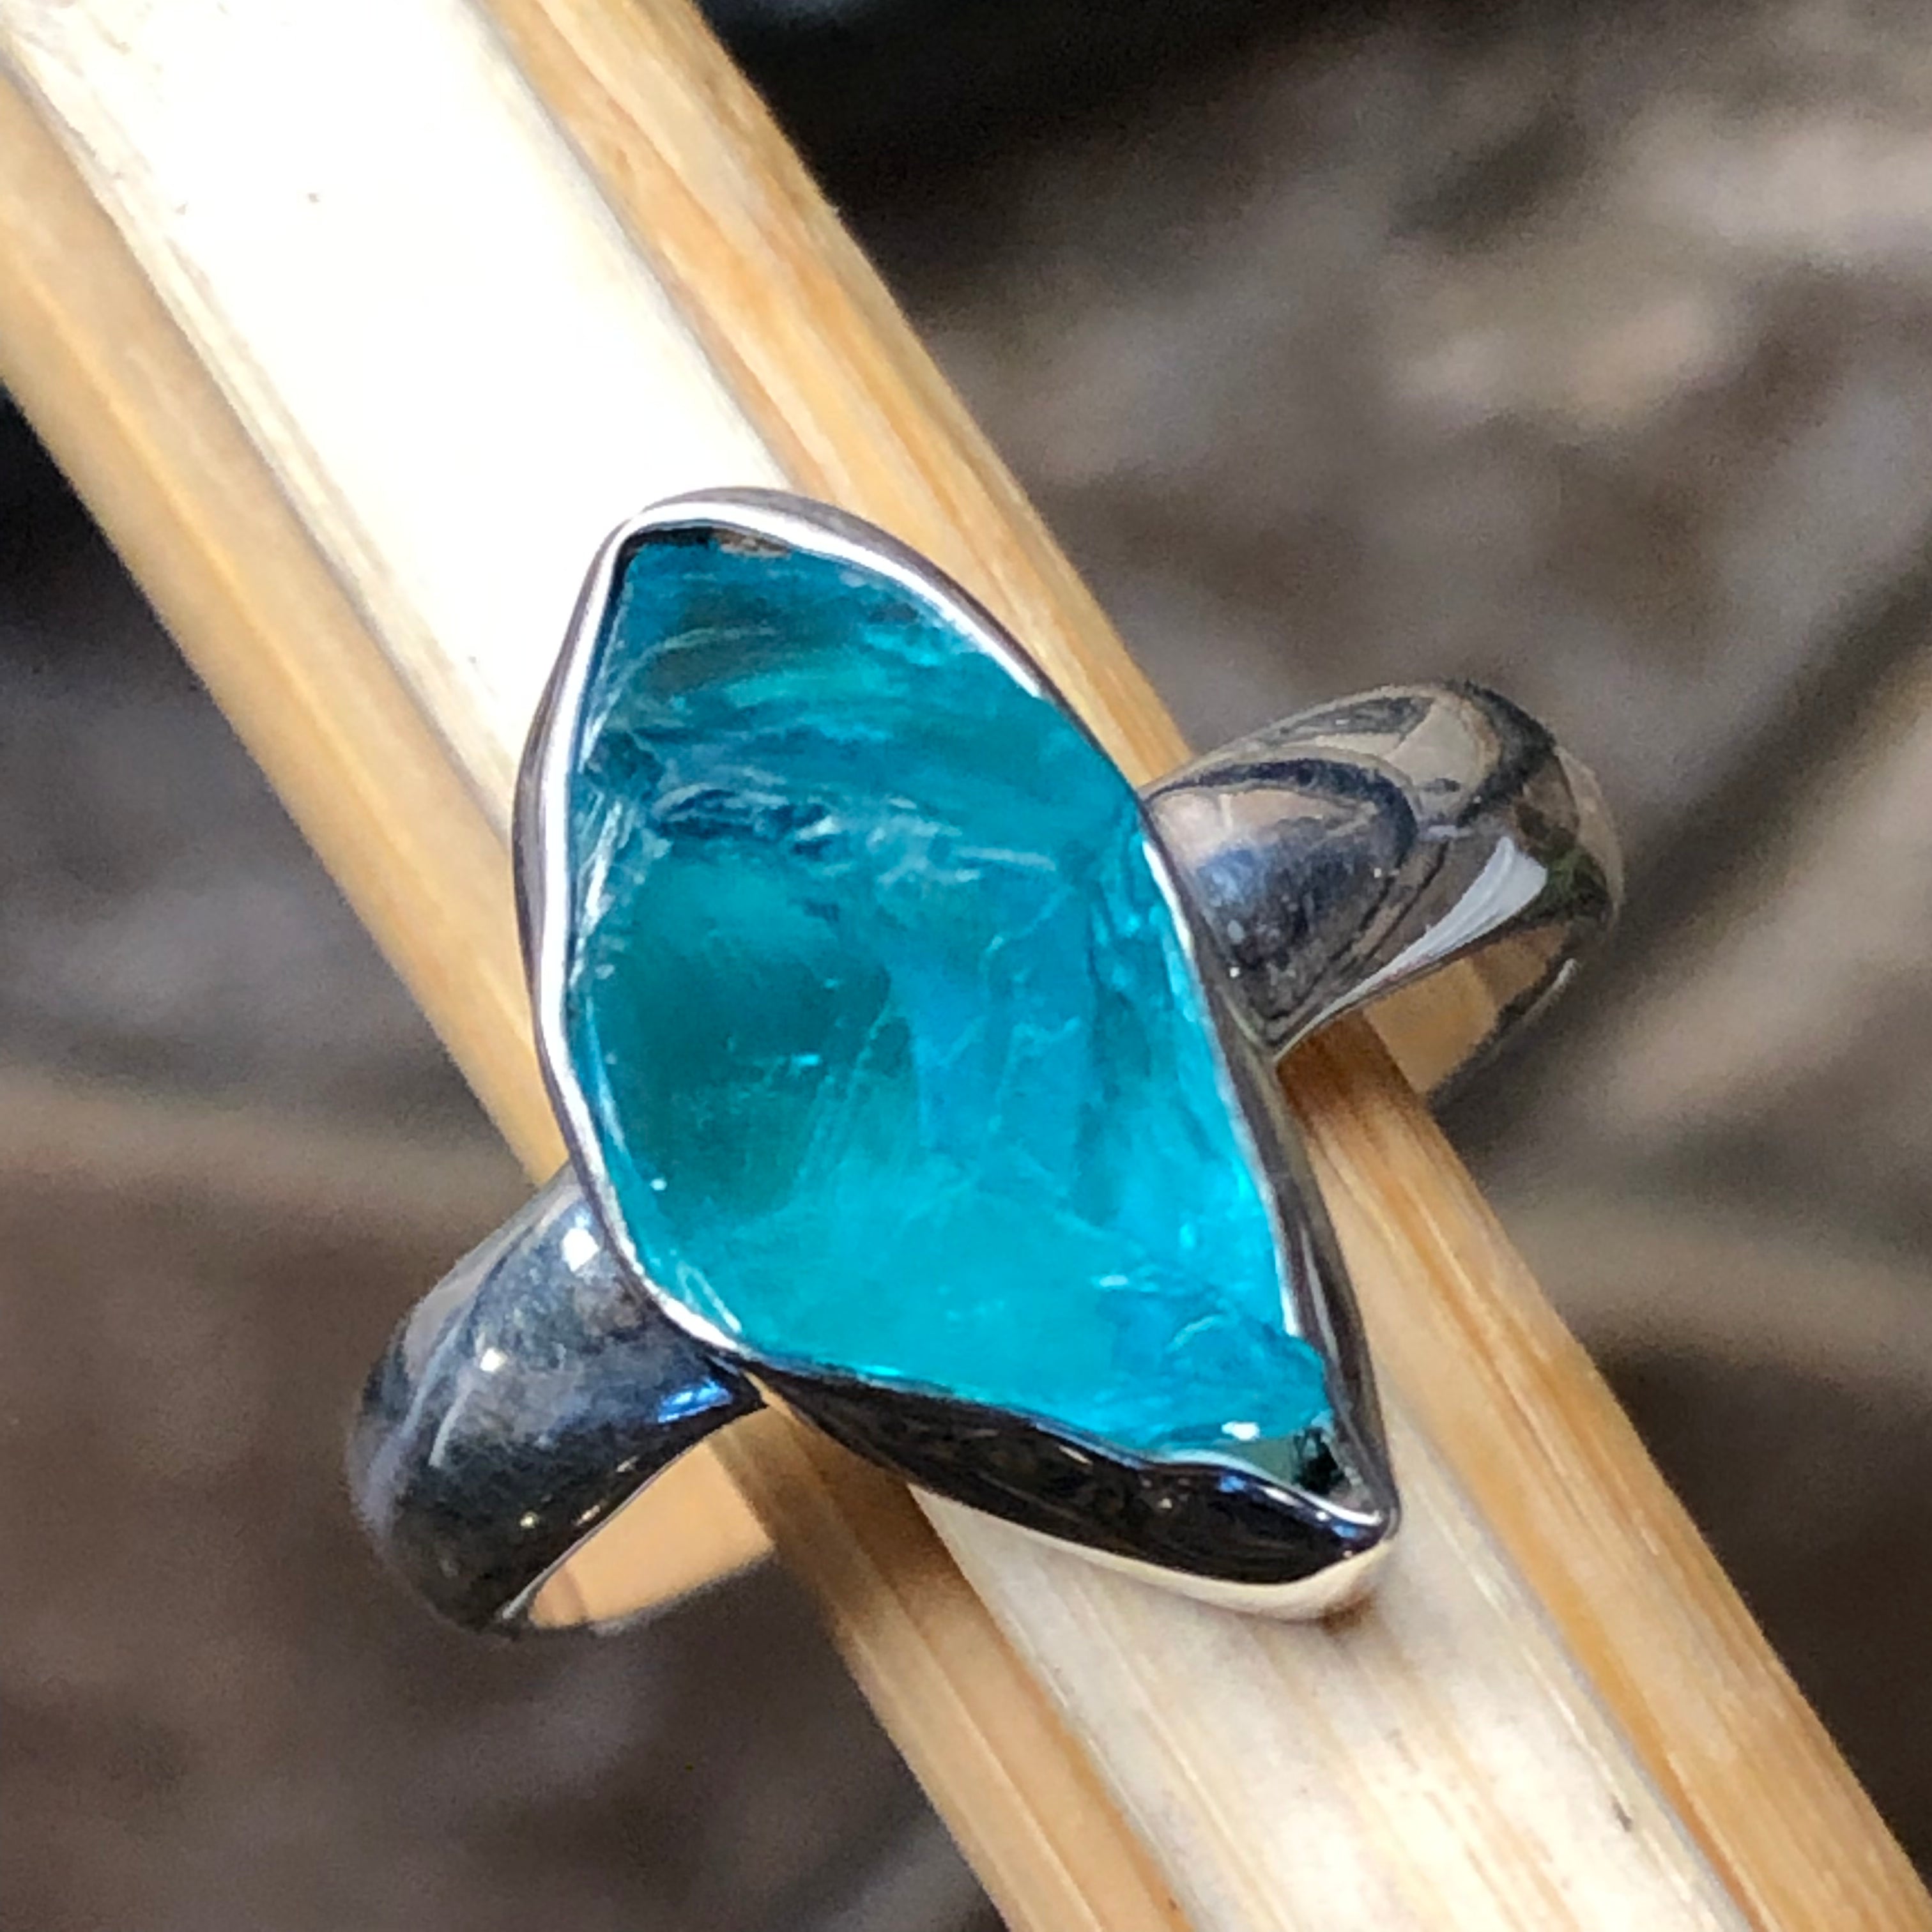 Genuine Neon Blue Apatite 925 Solid Sterling Silver Ring Size 8 - Natural Rocks by Kala